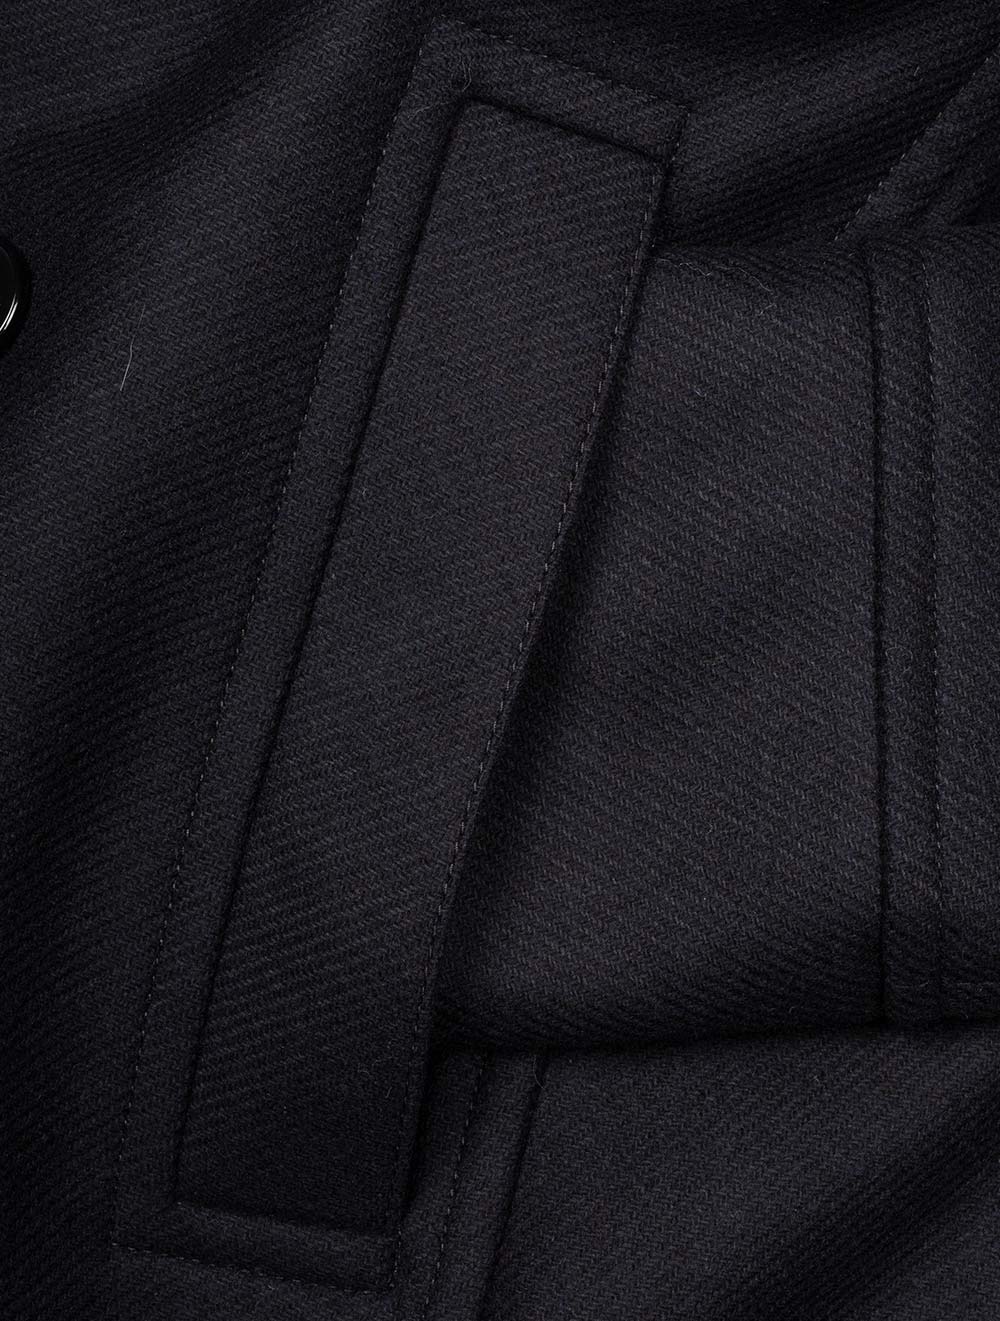 Peacoat With Double Breasted Closure Navy